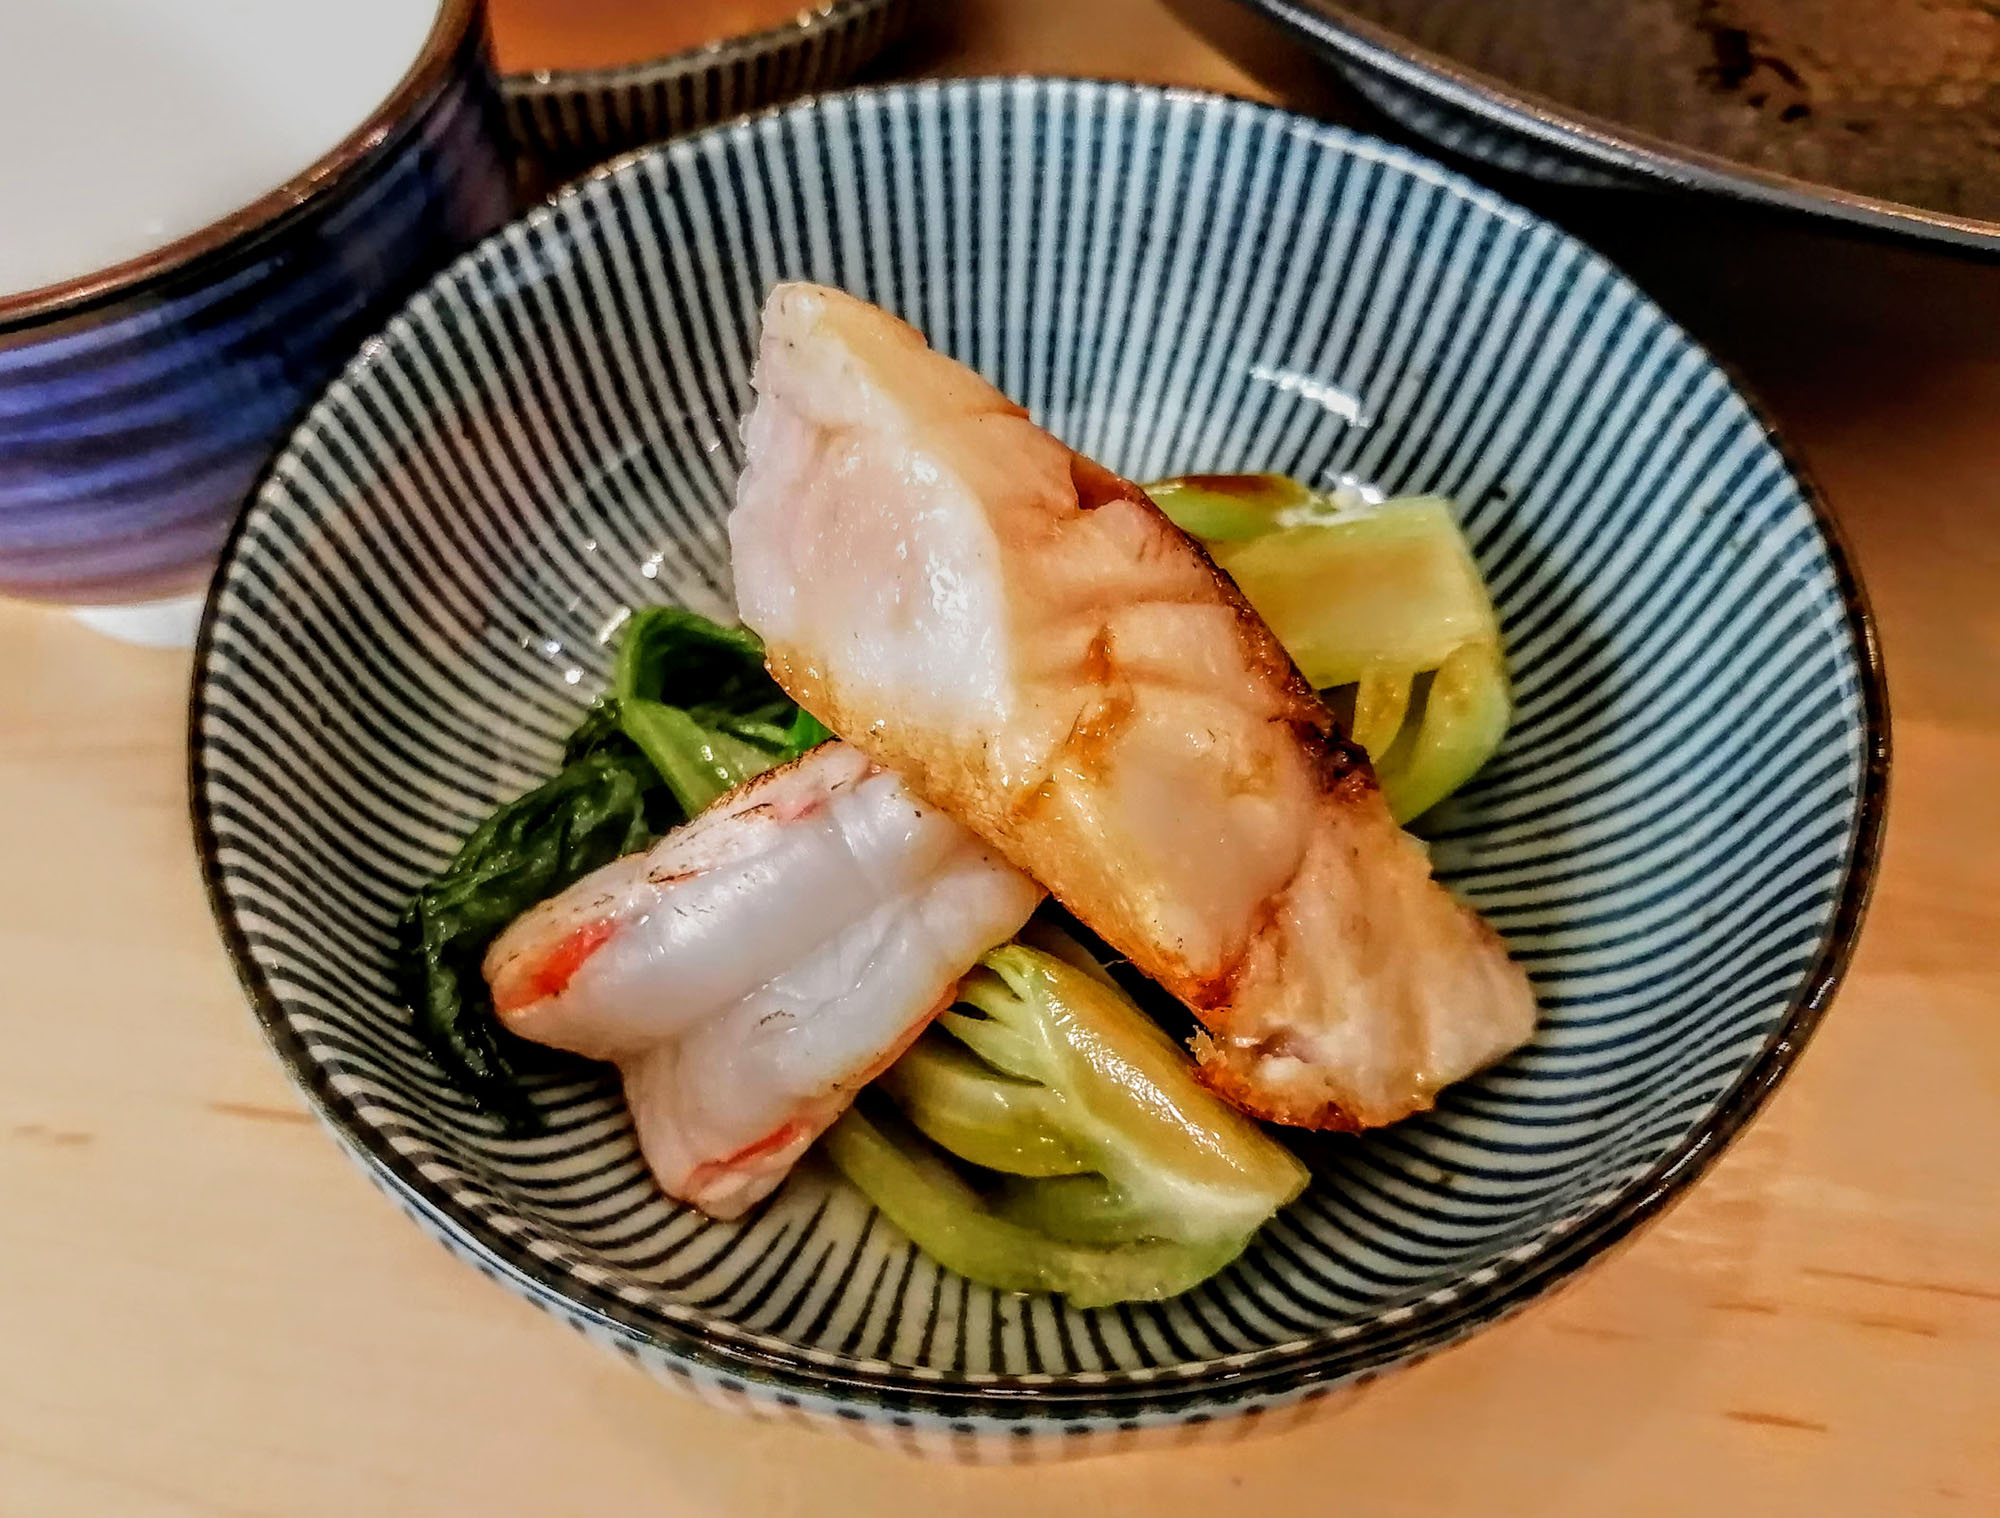 A close-up of seared fish, shrimp, and bok choy nestled inside a striped bowl. Photo by Paul Young.